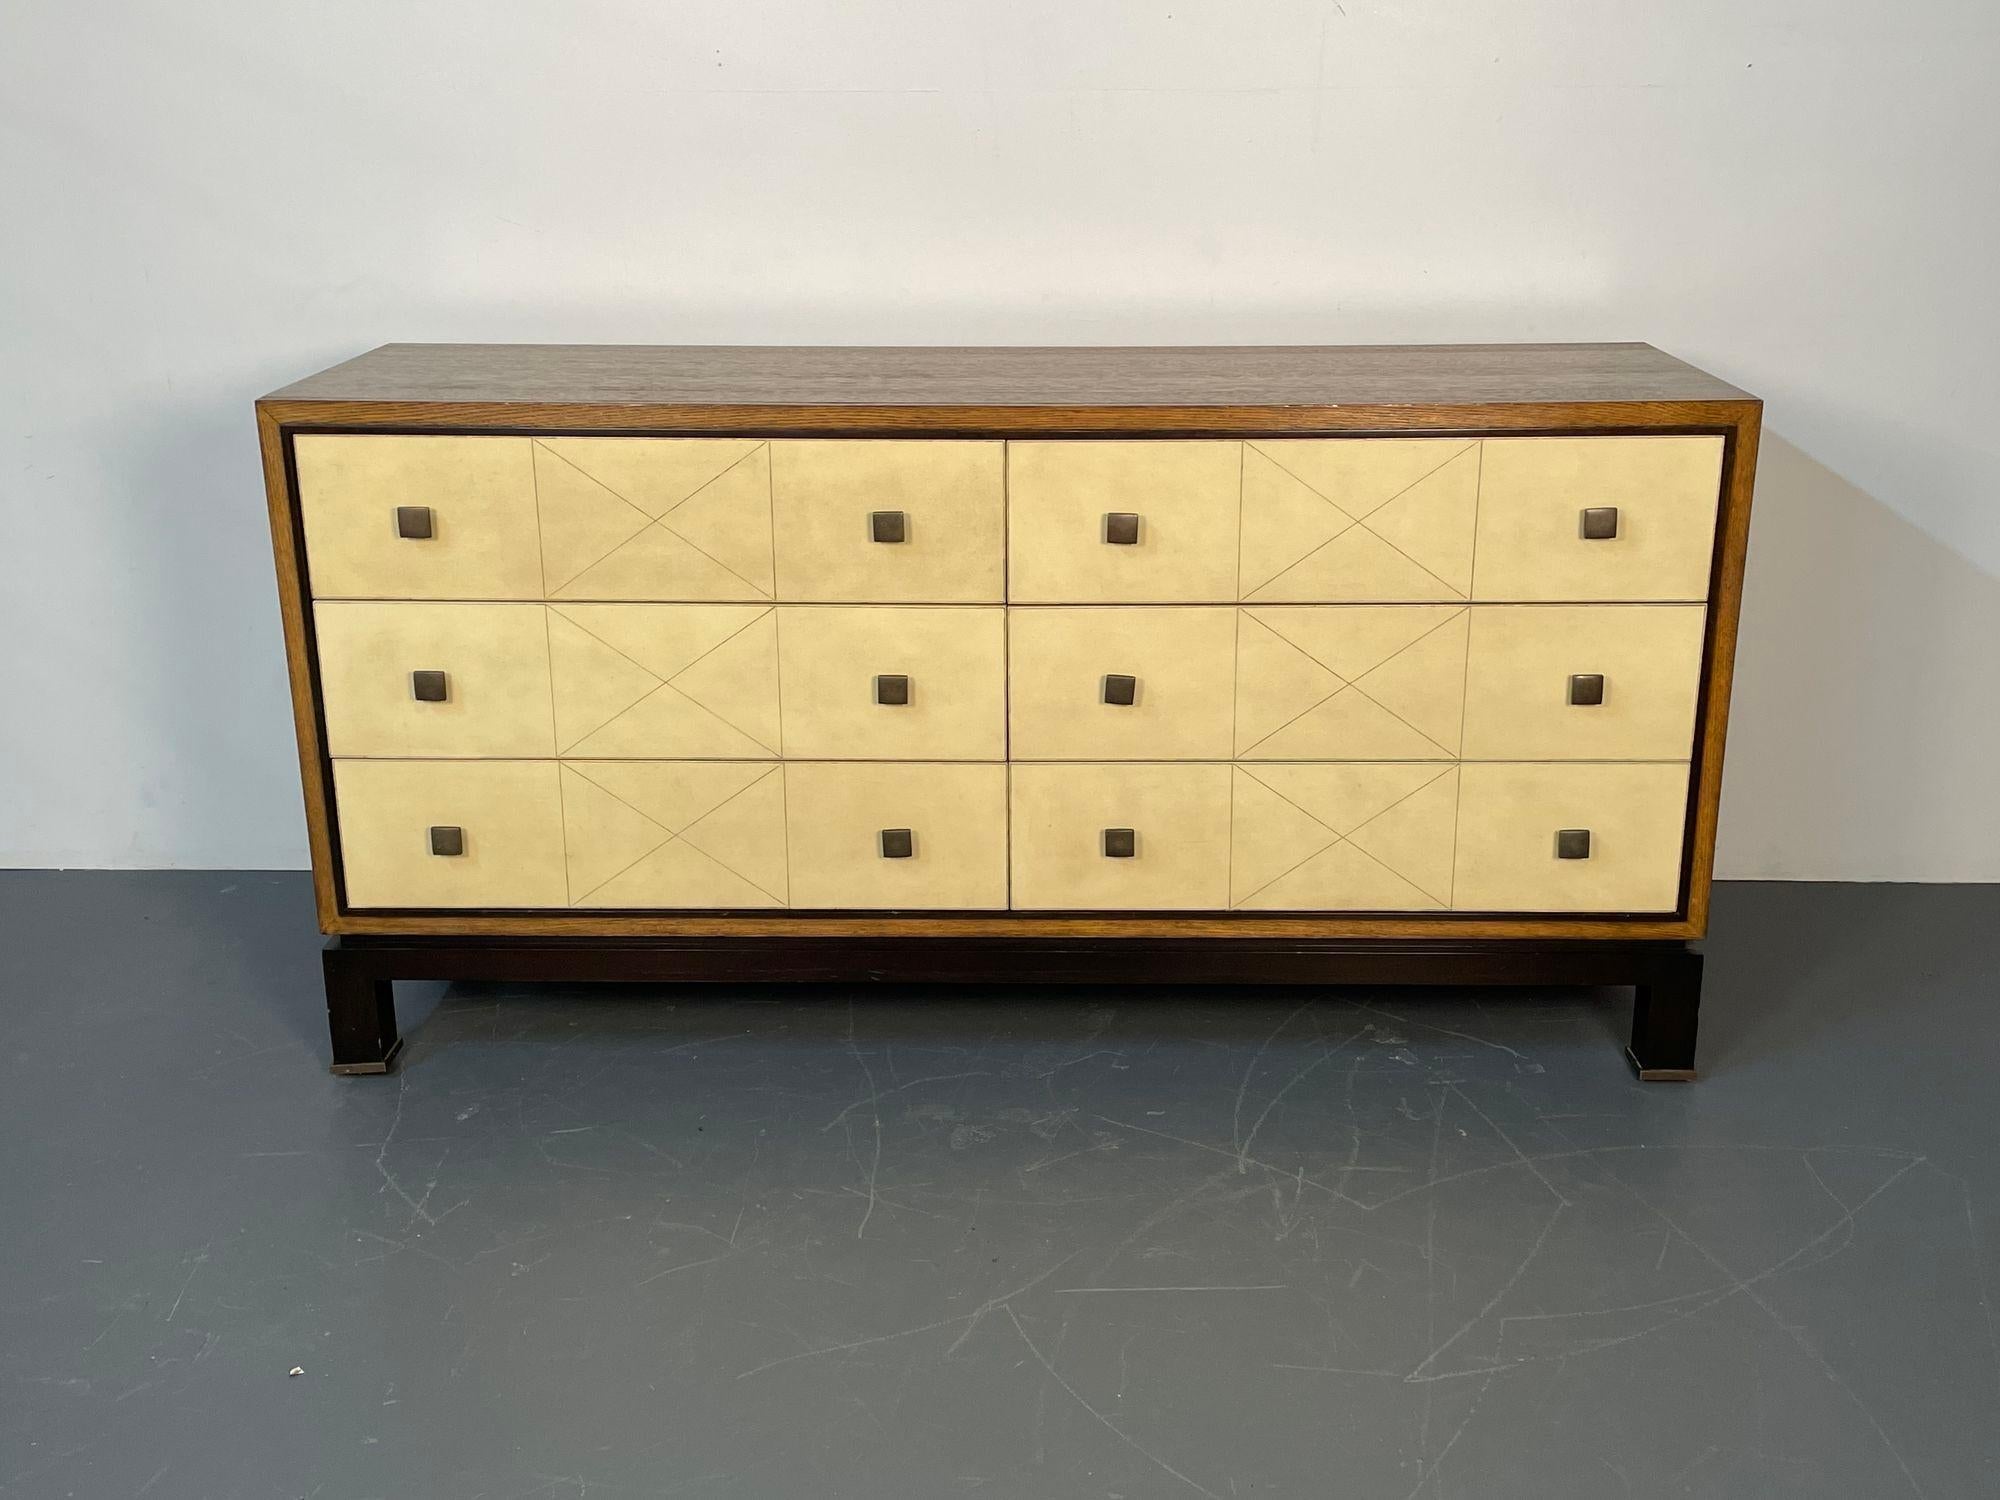 American Mid-Century Modern Parzinger Style Parchment Dresser / Sideboard / Cabinet For Sale